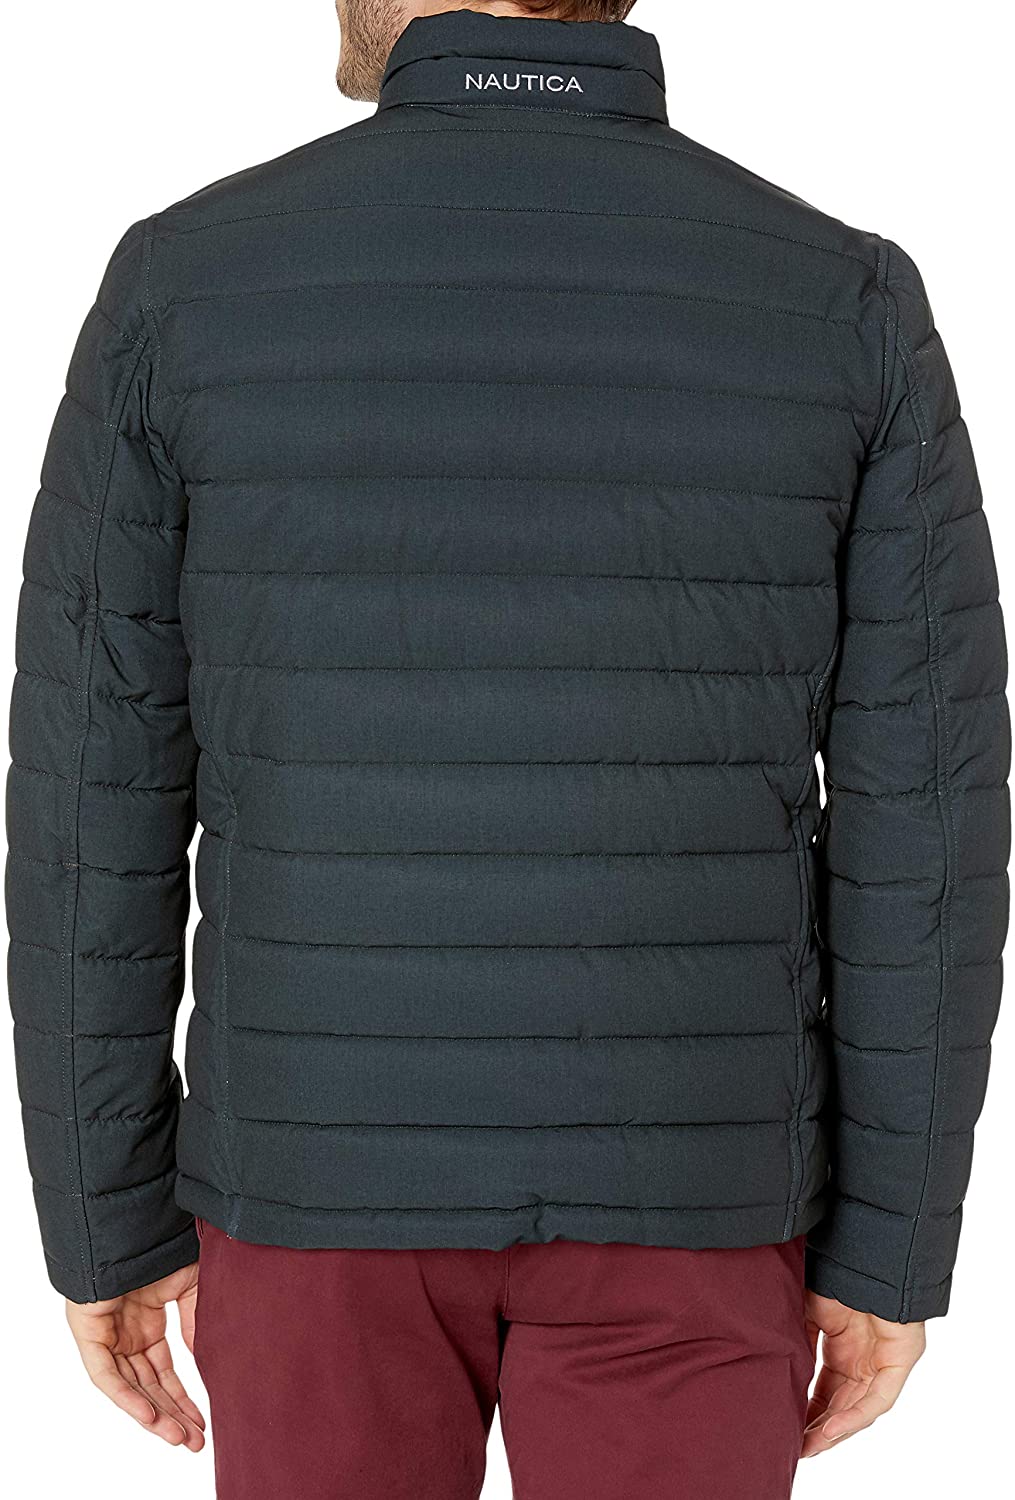 Nautica mens Poly Stretch Reversible Midweight Puffer Jacket | eBay